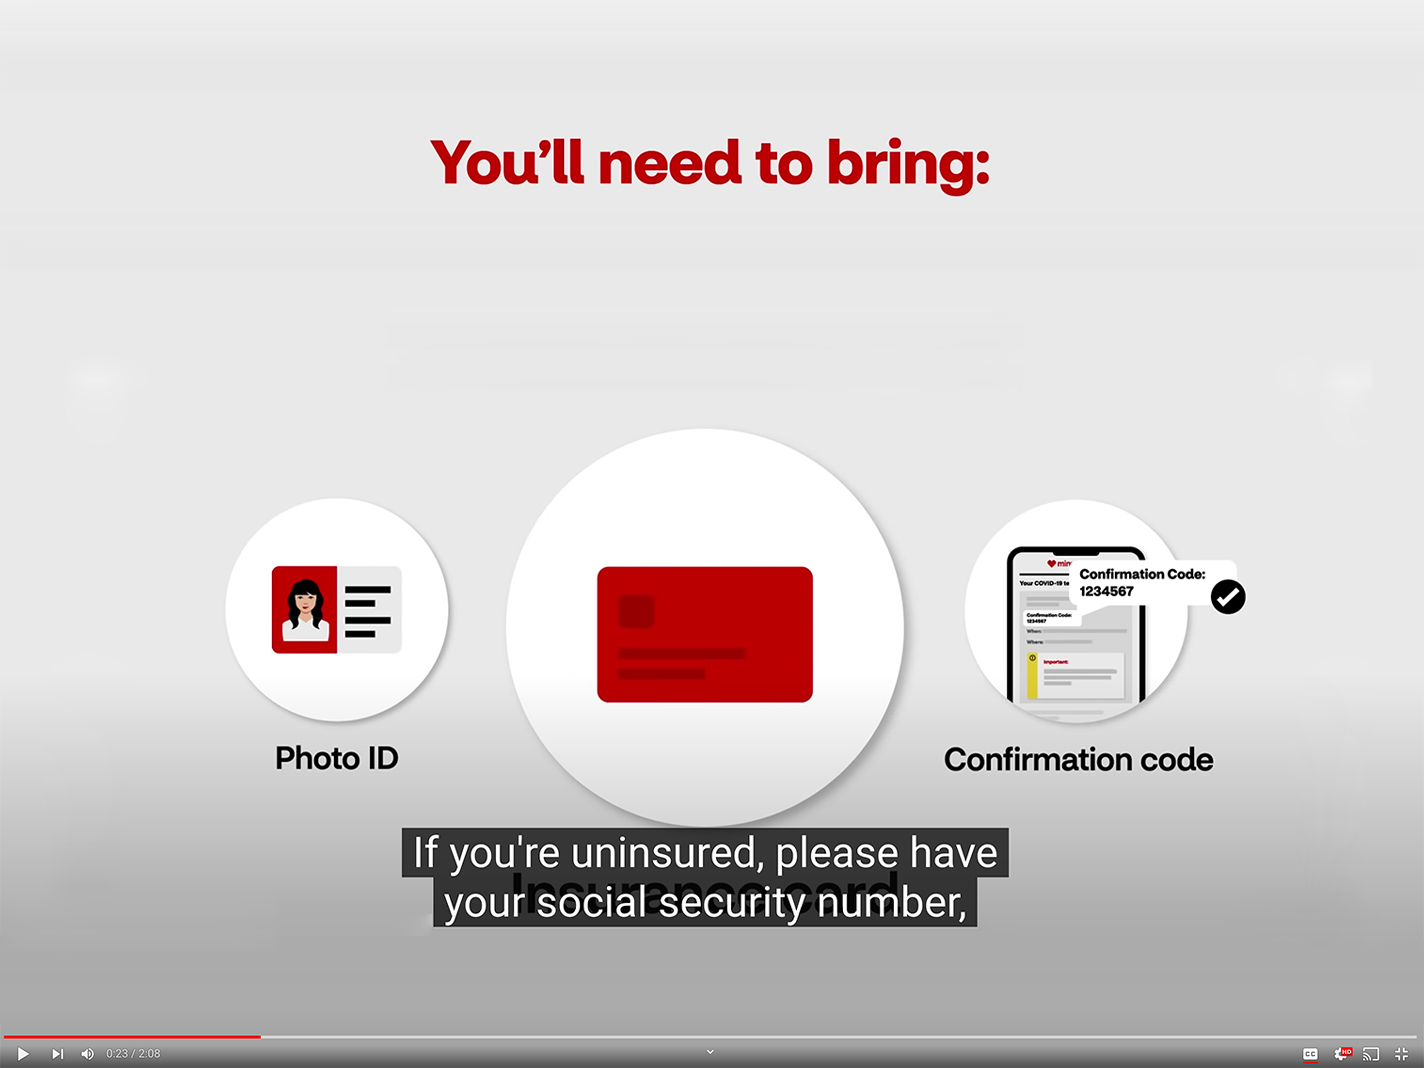 A still frame of a CVS Health video, an animated infographic: "You'll need to bring: Photo ID, Insurance card, Confirmation Code". Captions read "If you're uninsured, please have your social security number".